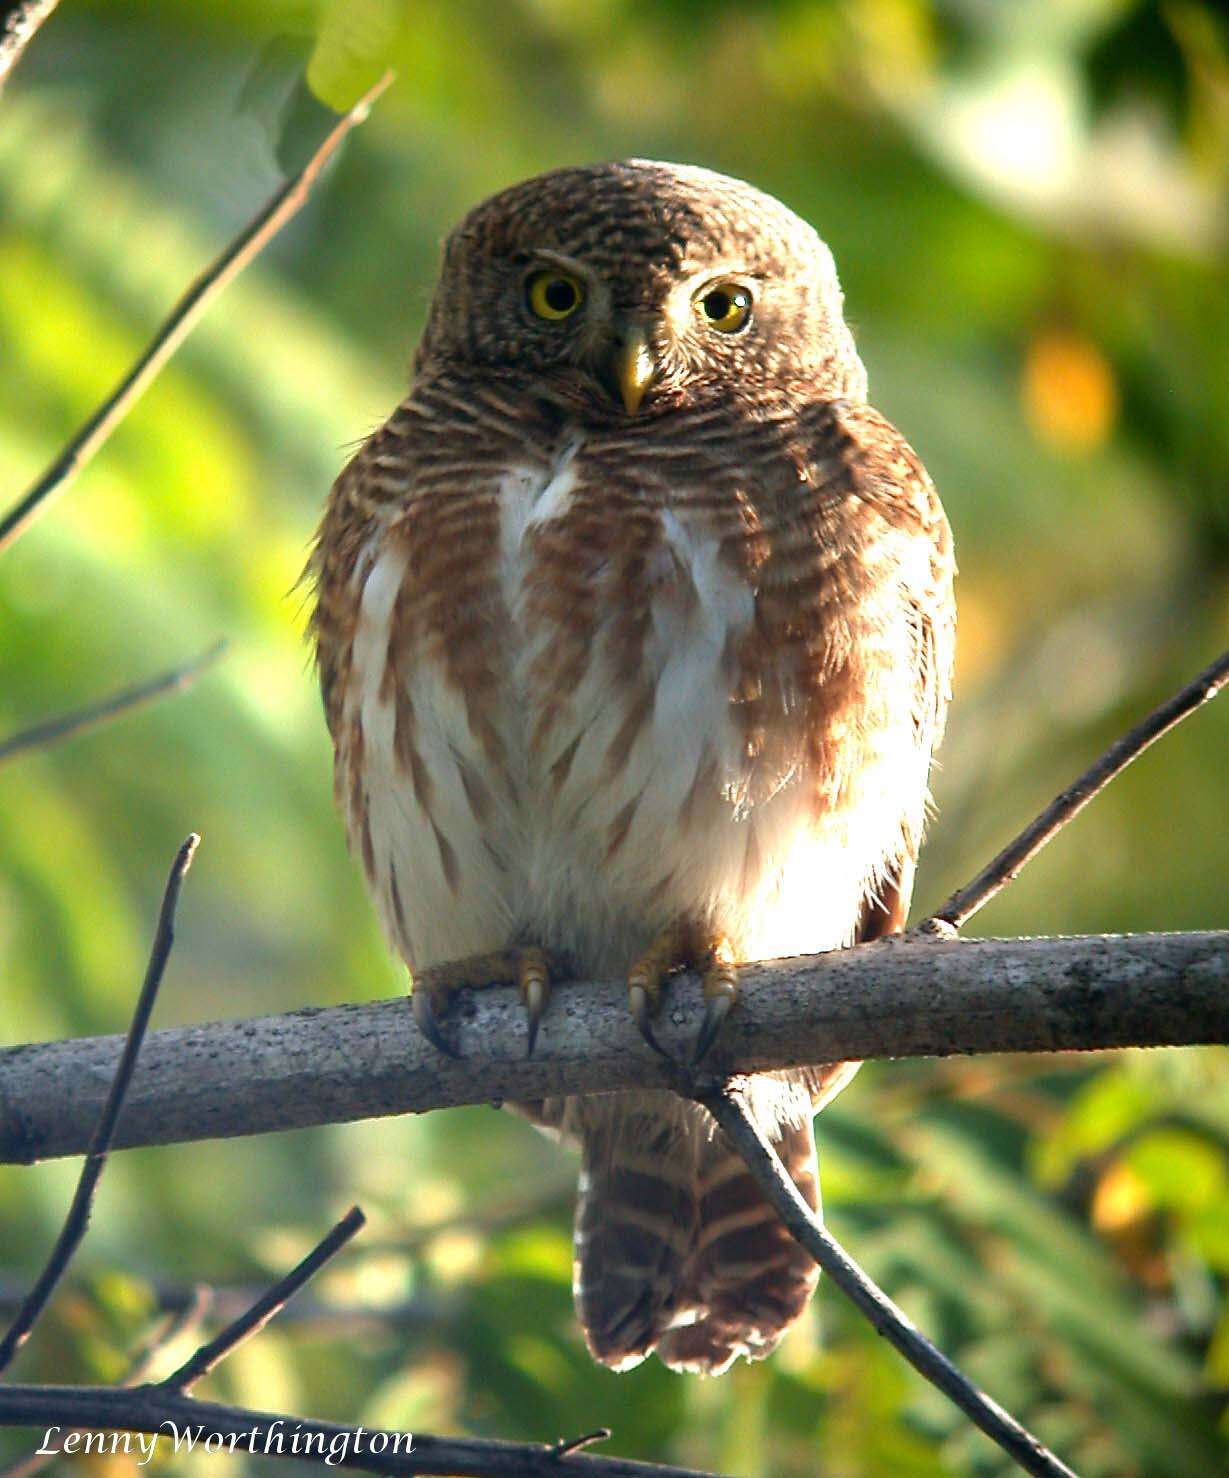 Image of Asian Barred Owlet